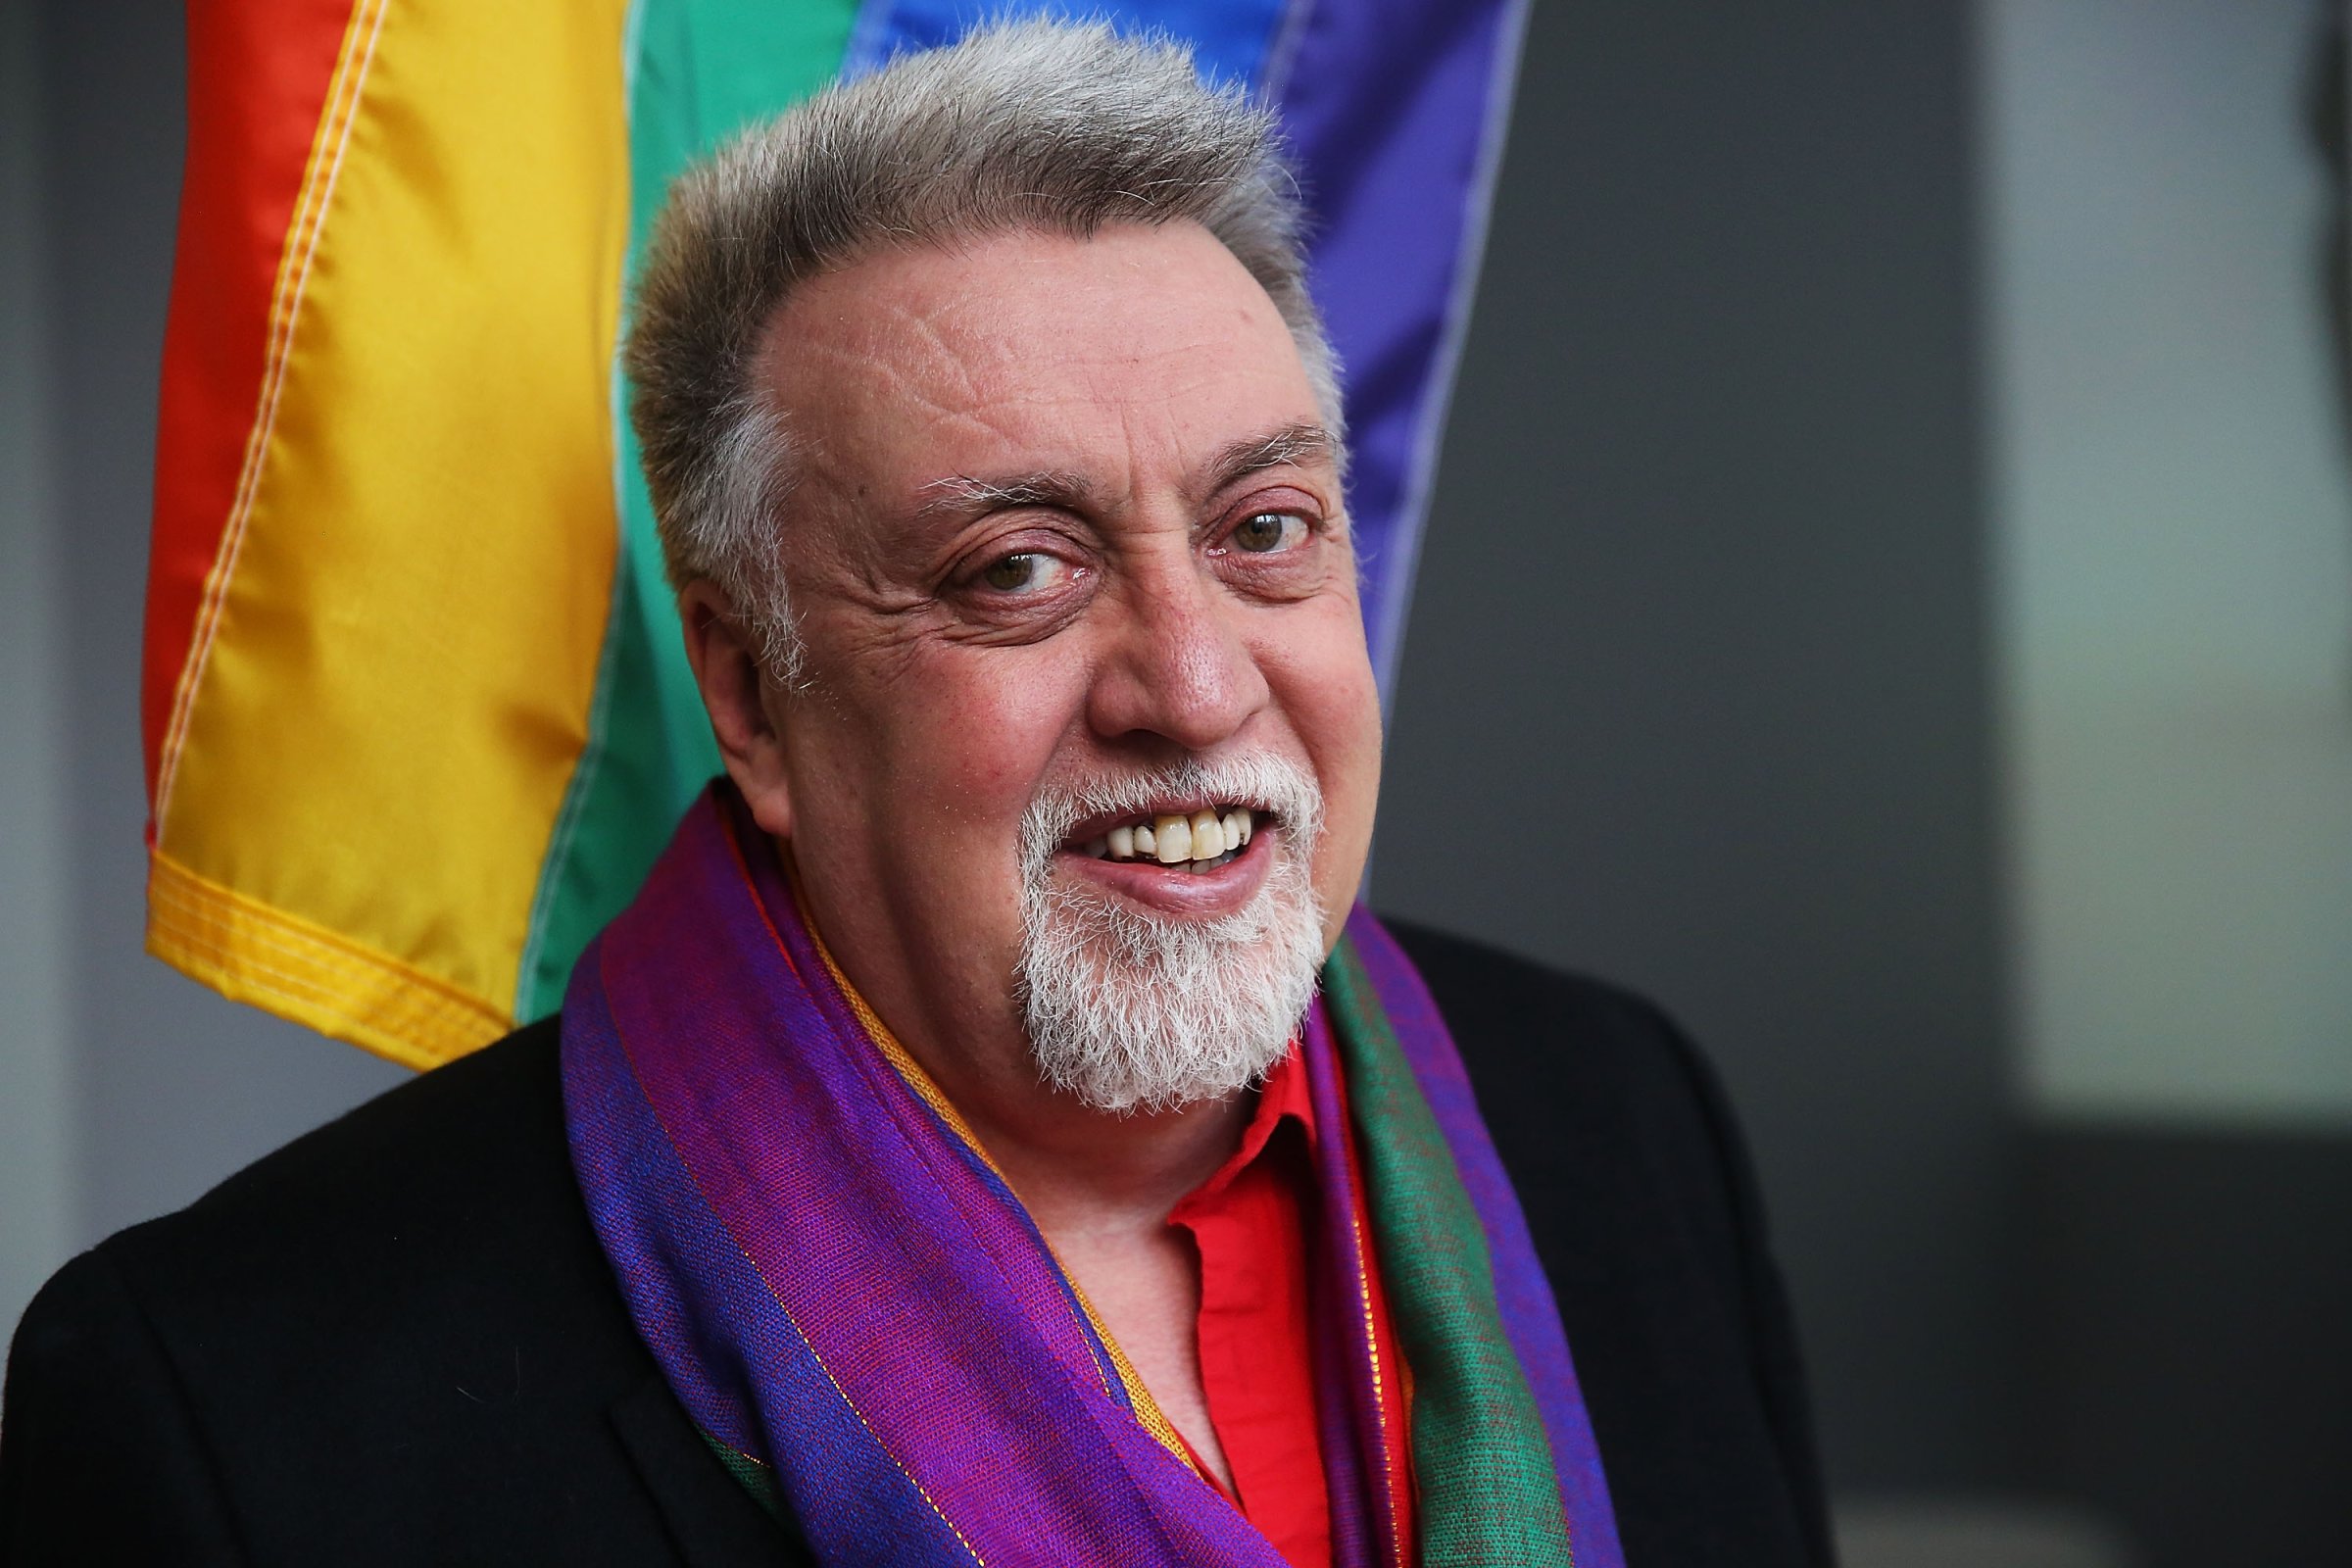 Rainbow Flag Creator Gilbert Baker Speaks At MOMA, After Museum Acquires Flag For Permanent Collection